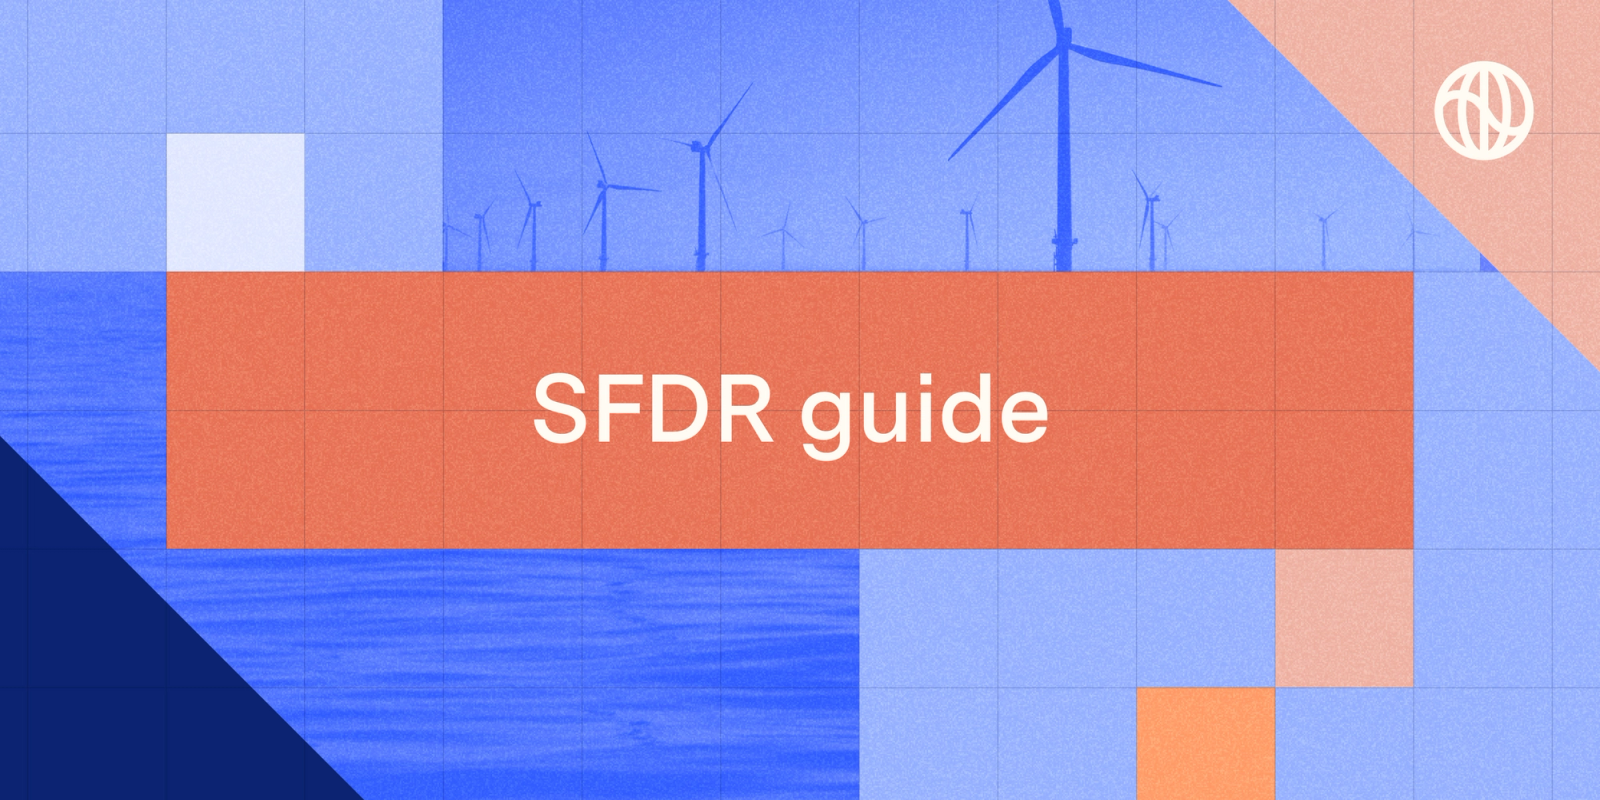 Image with text "SFDR guide"